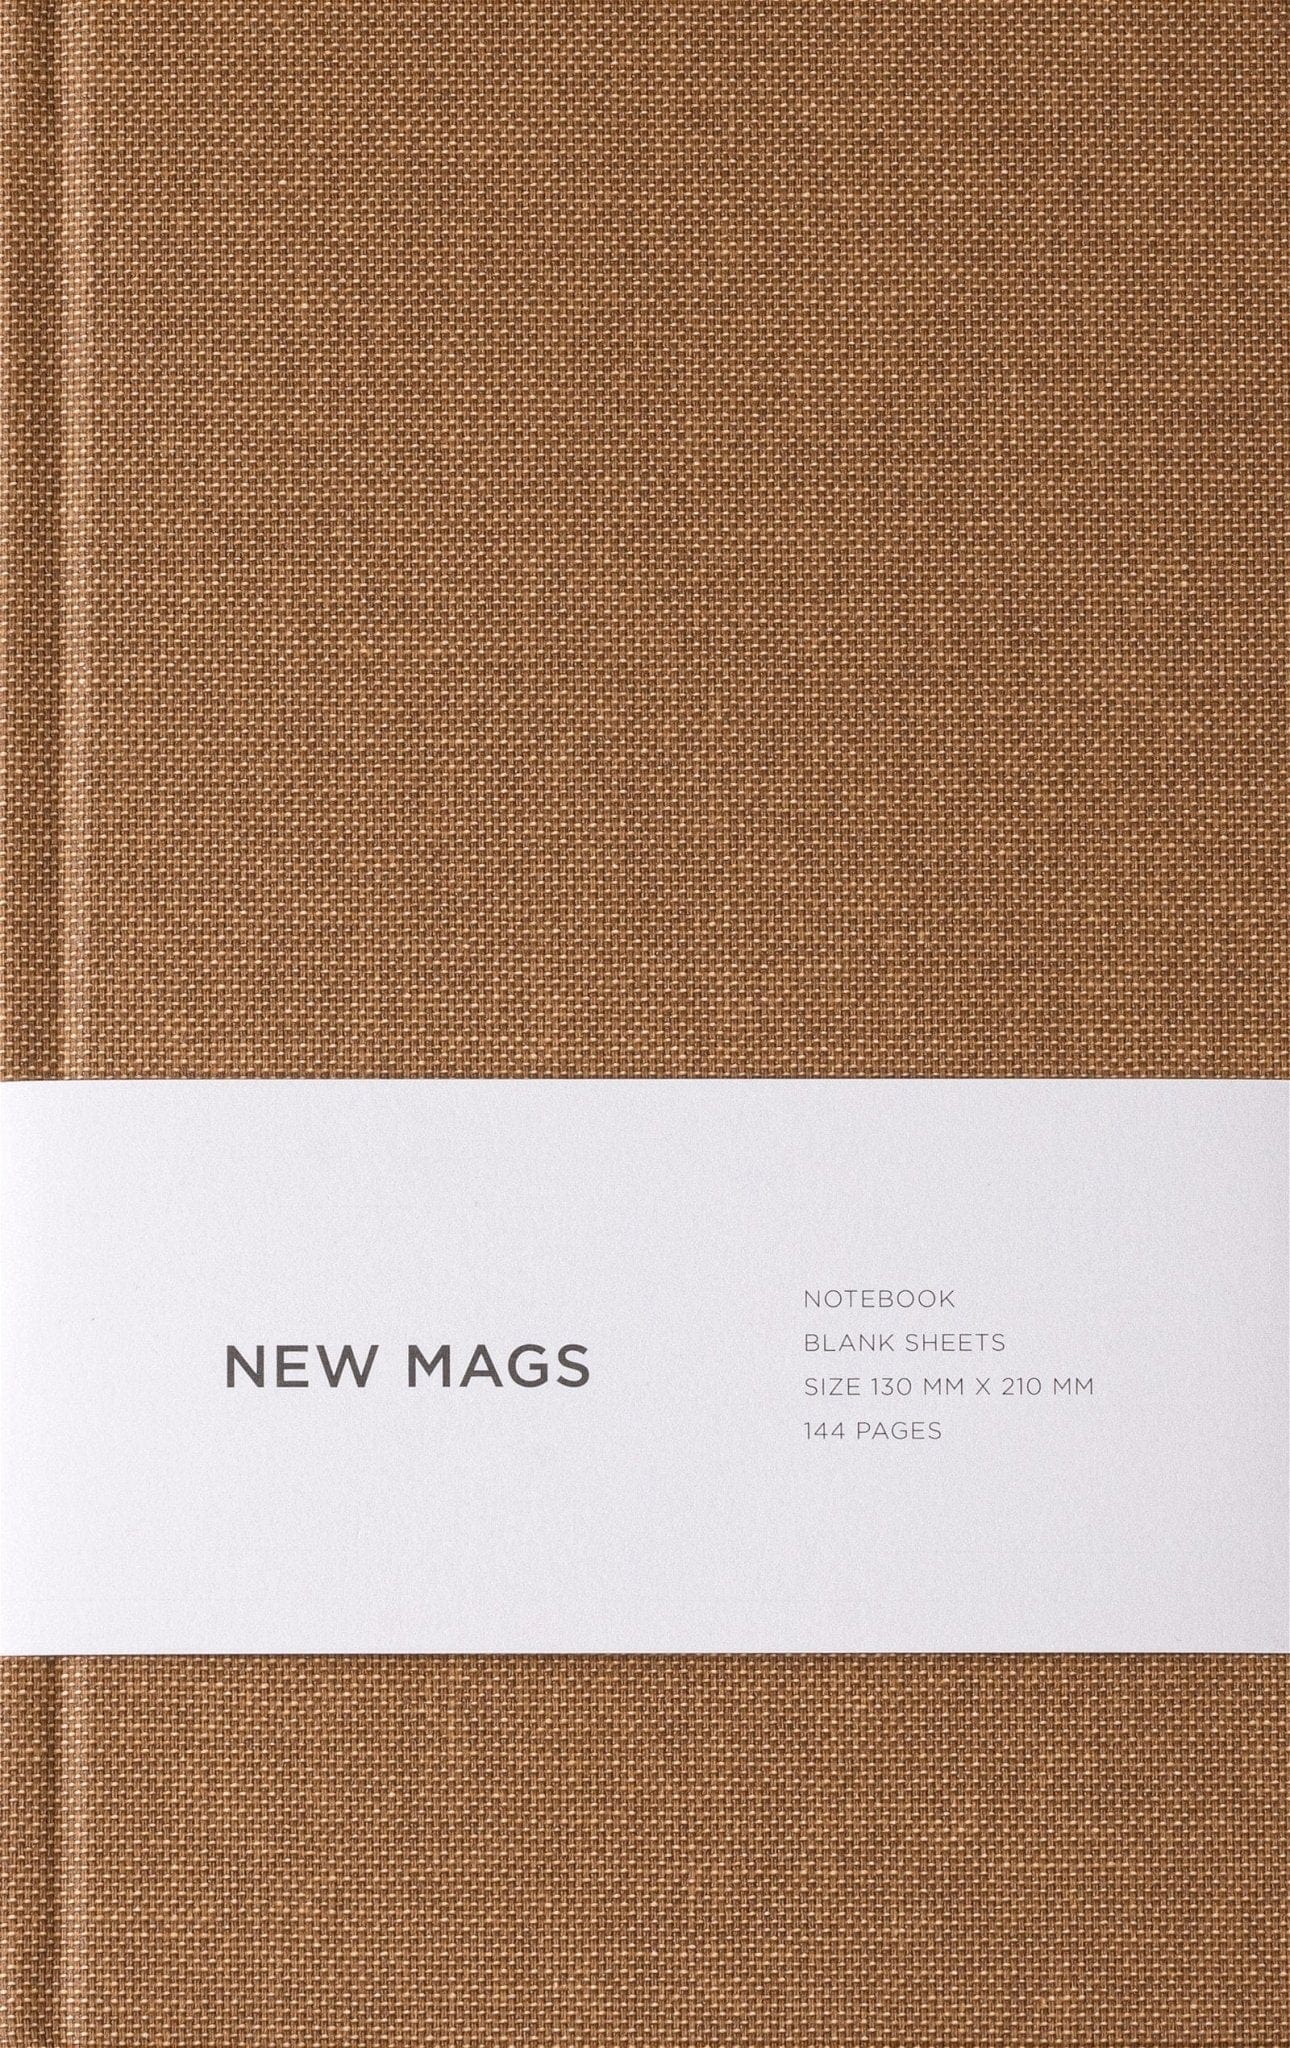 NewMags Agenda Notebook Brown - Hardcover/Blank, in Limba Engleza